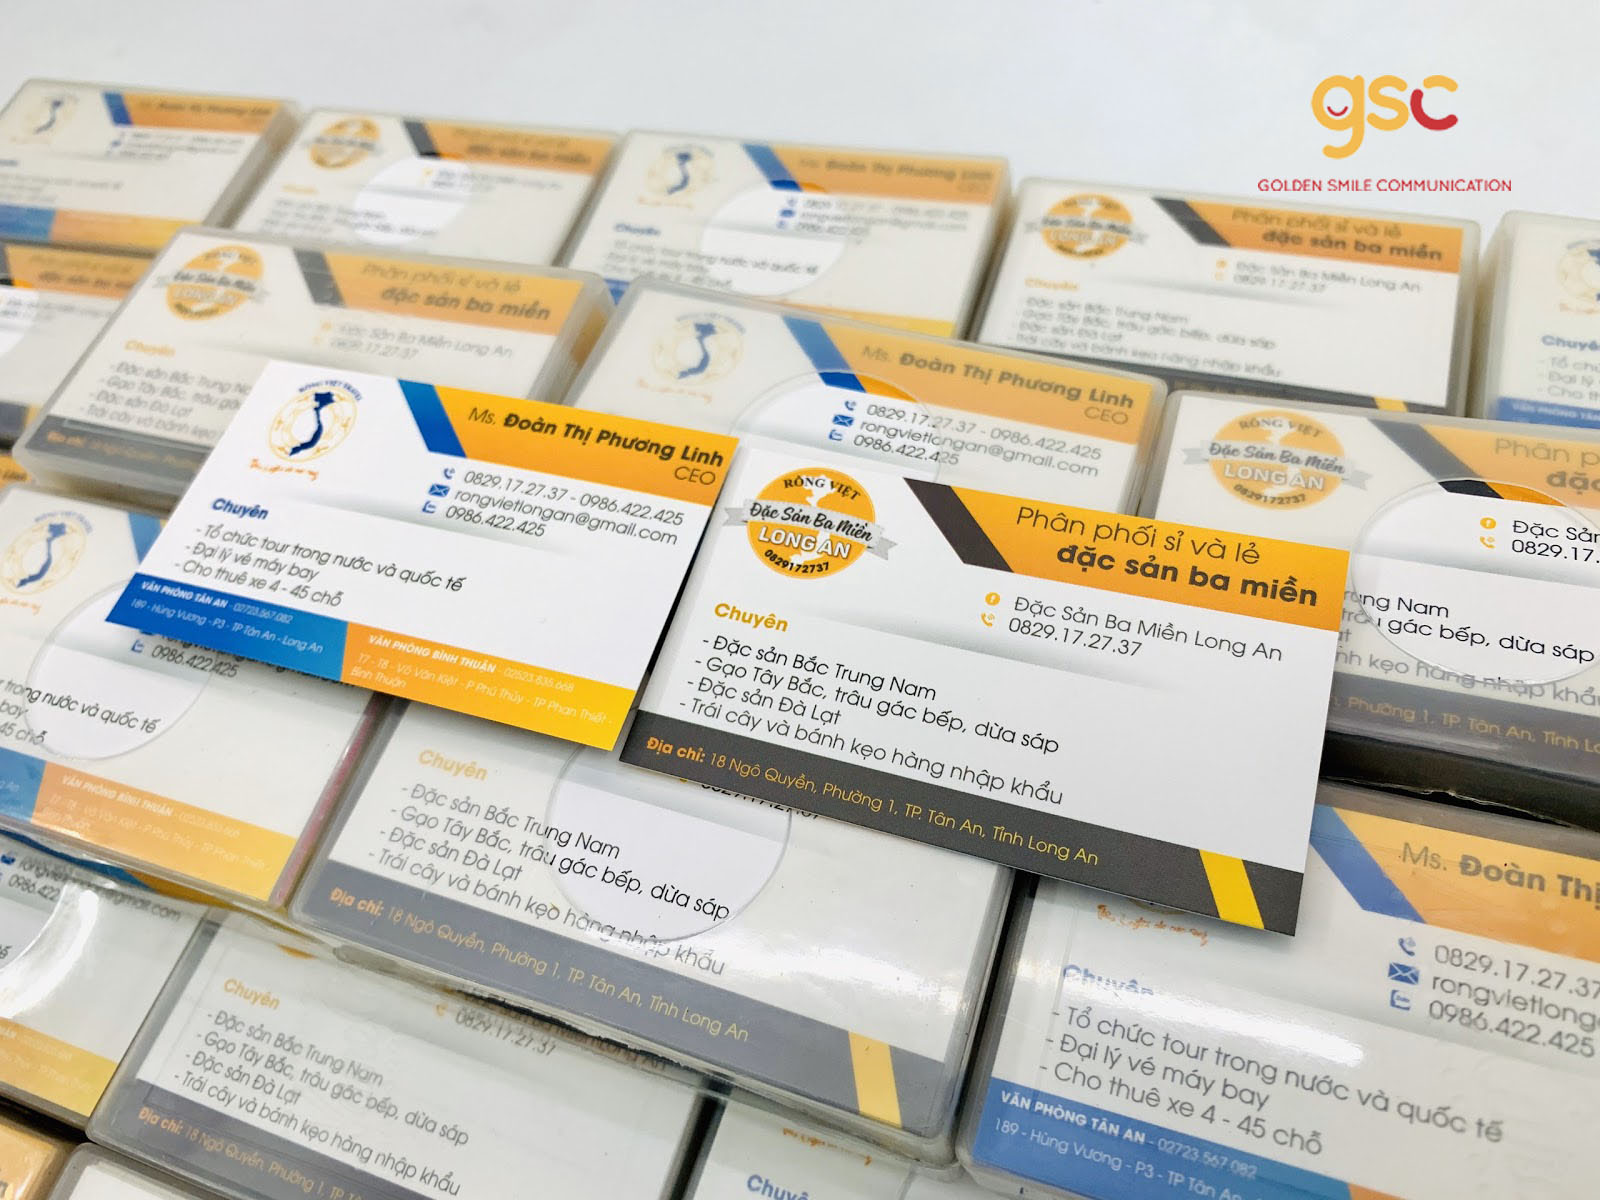 GSC-danh thiep- sony